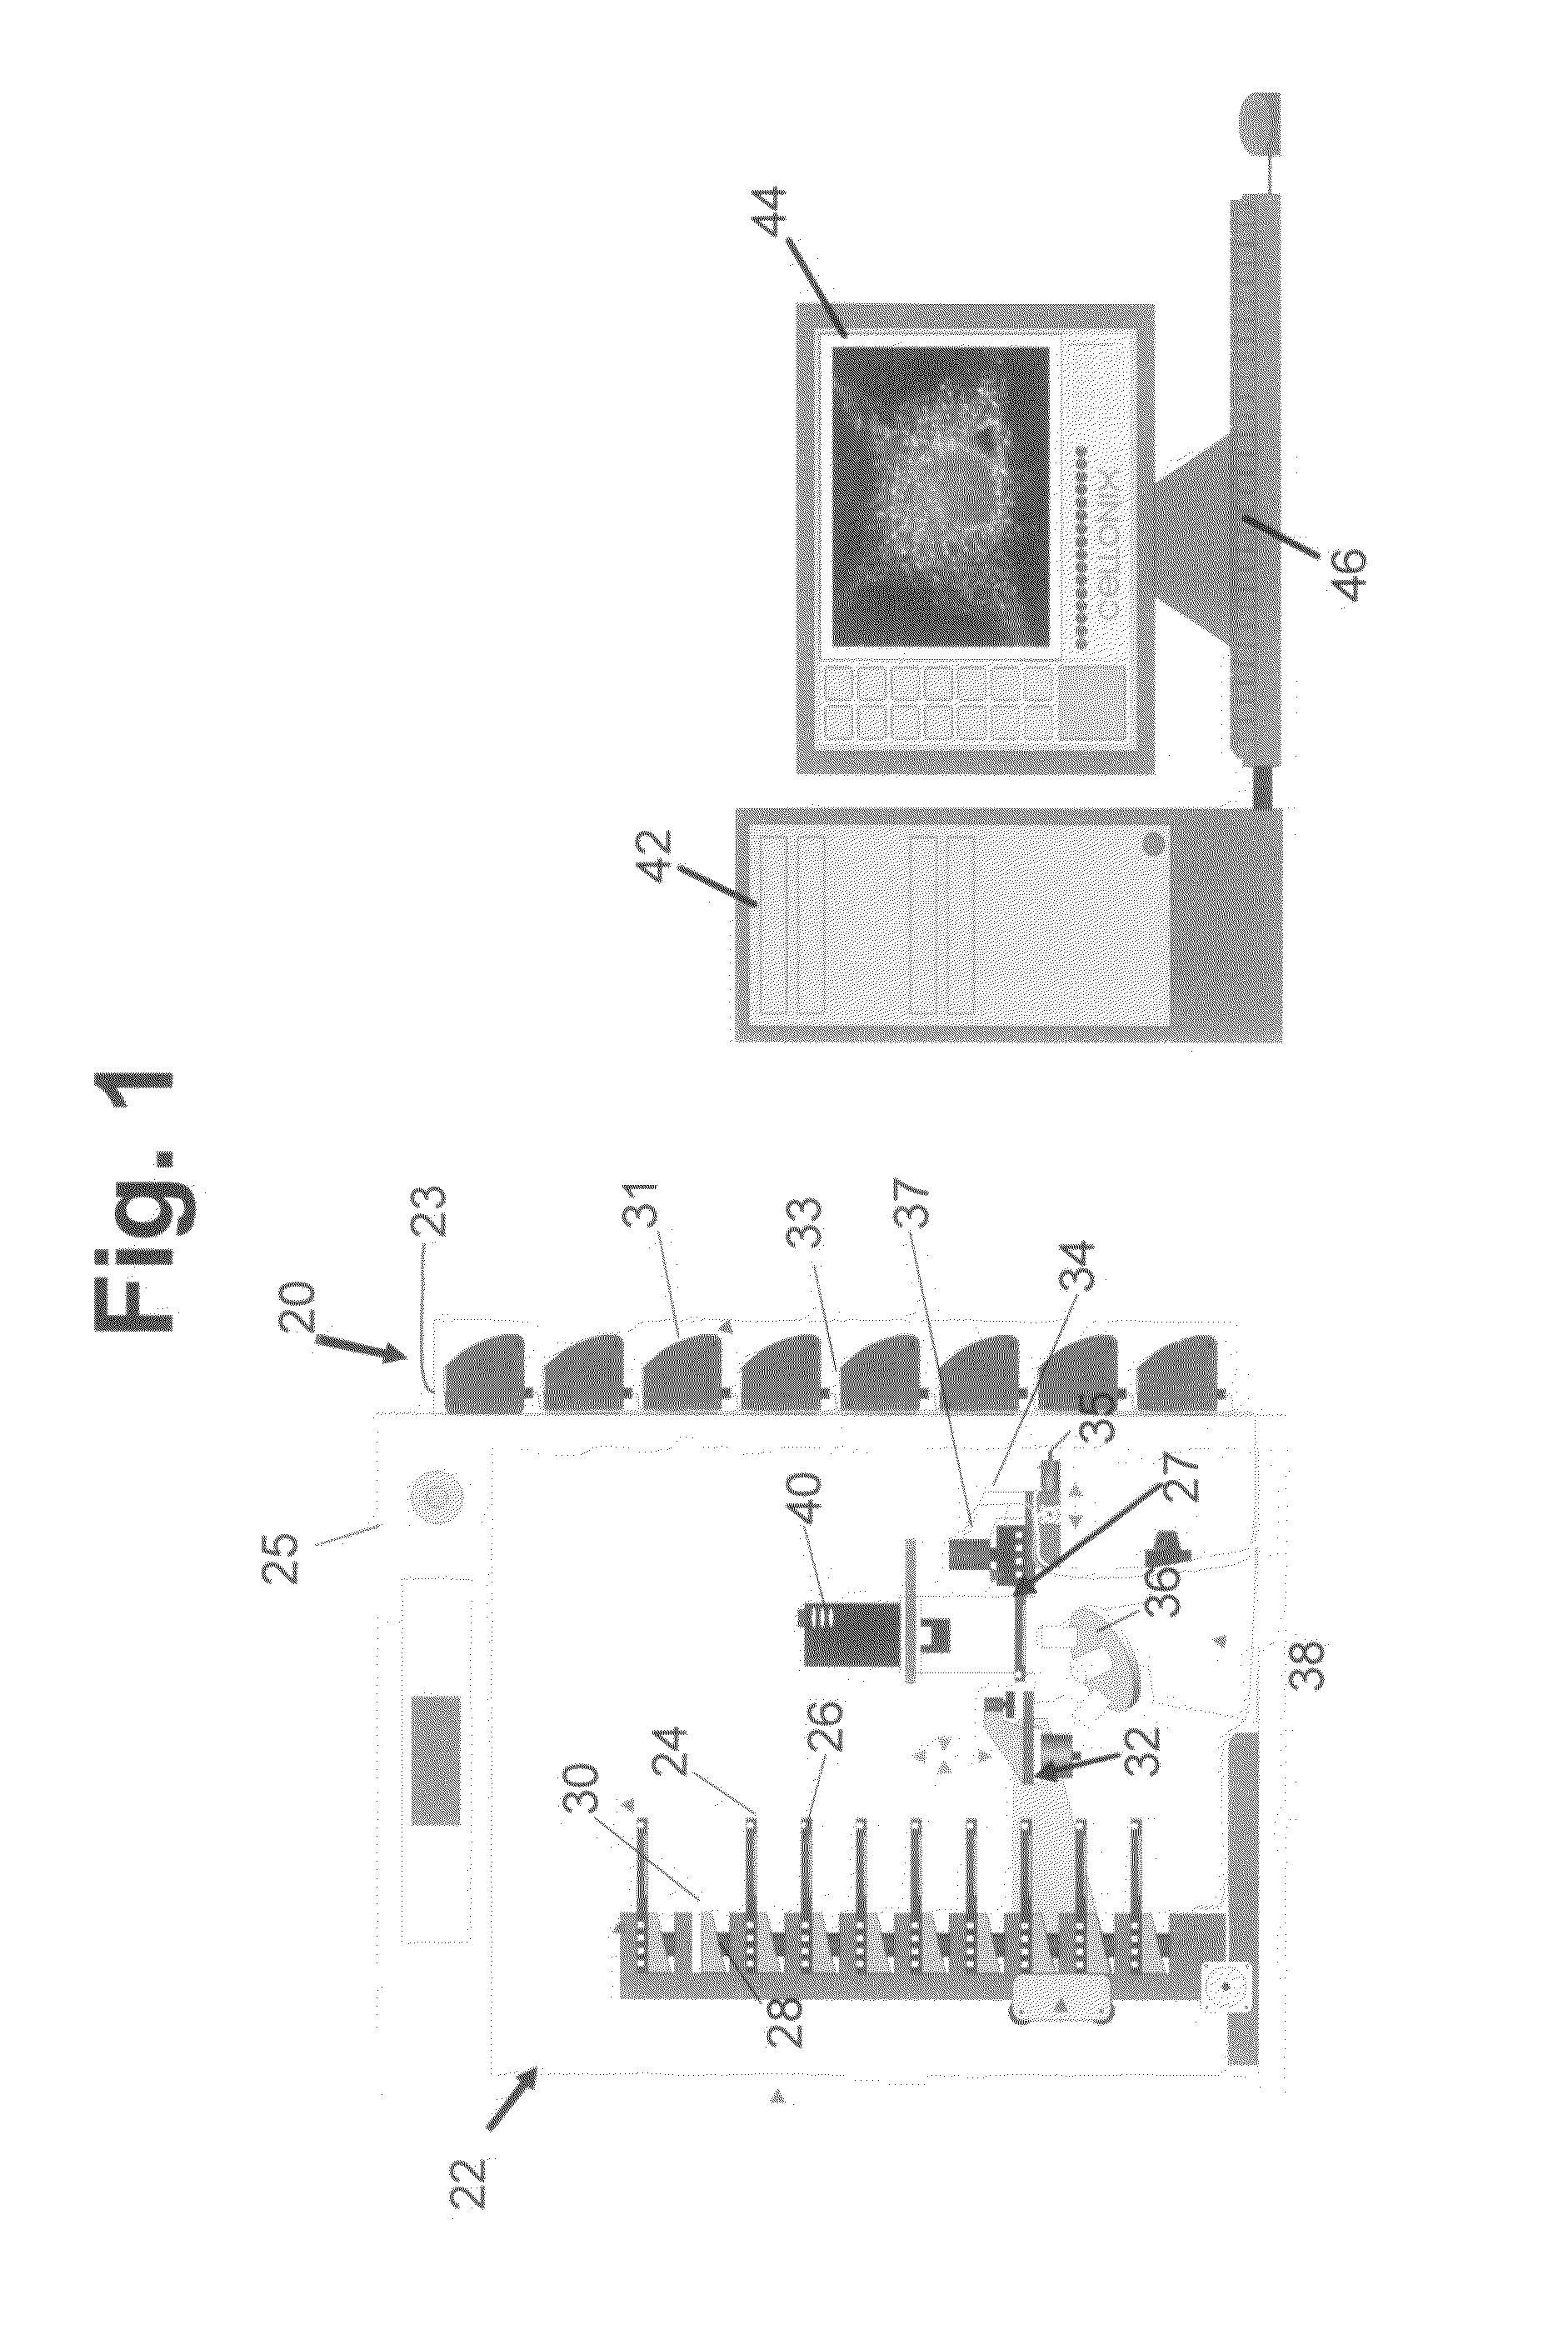 Microwell cell-culture device and fabrication method